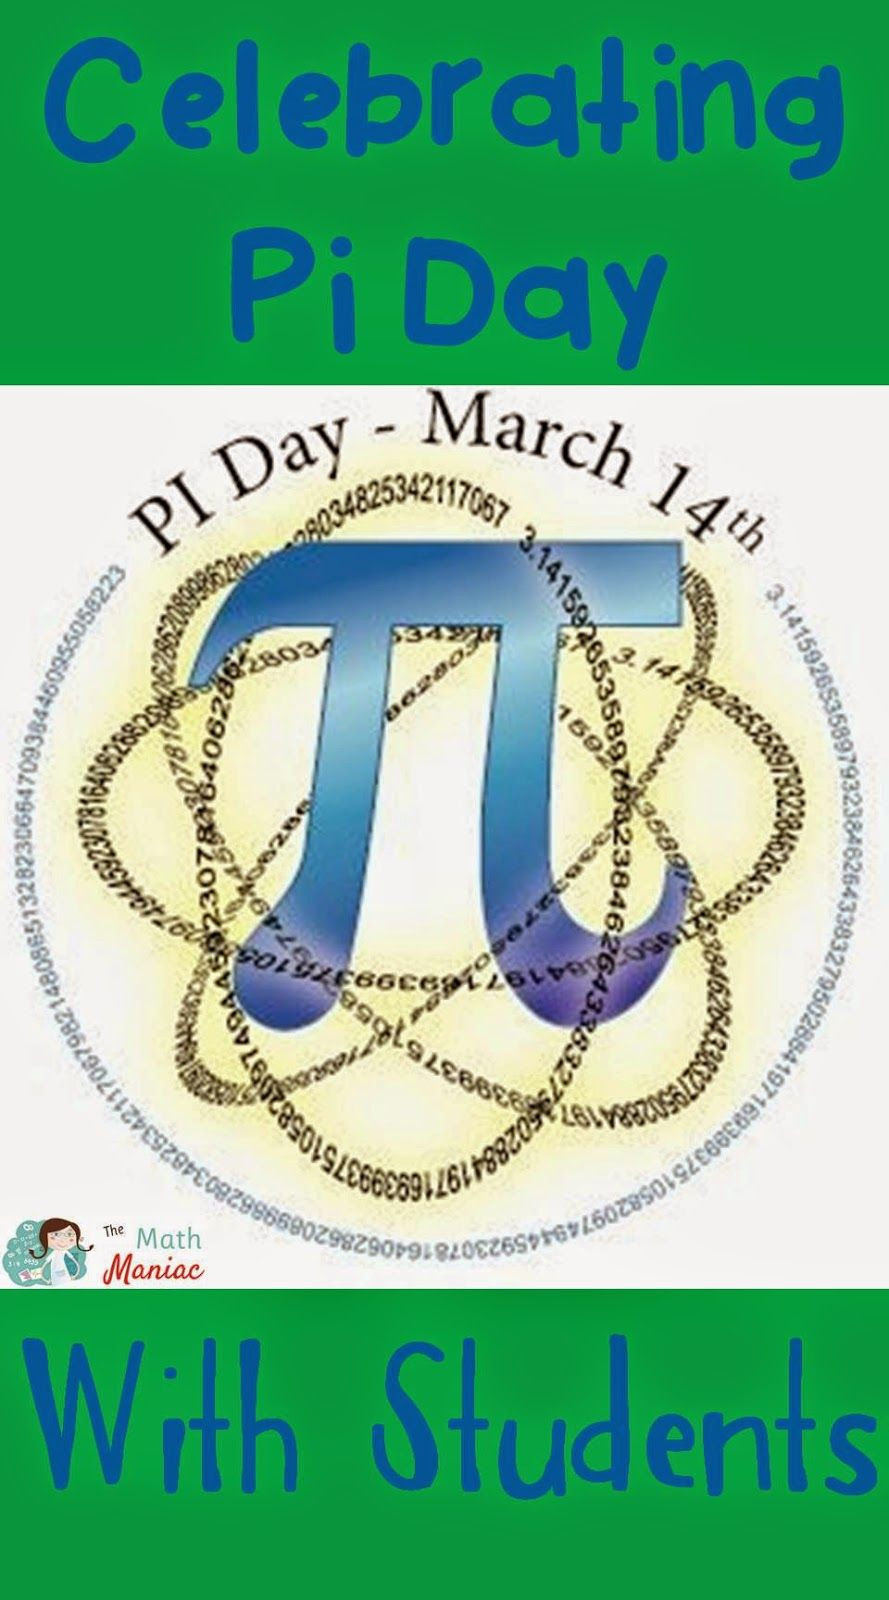 Pi Day Ideas For Middle School
 Ideas for celebrating Pi day with upper elementary and